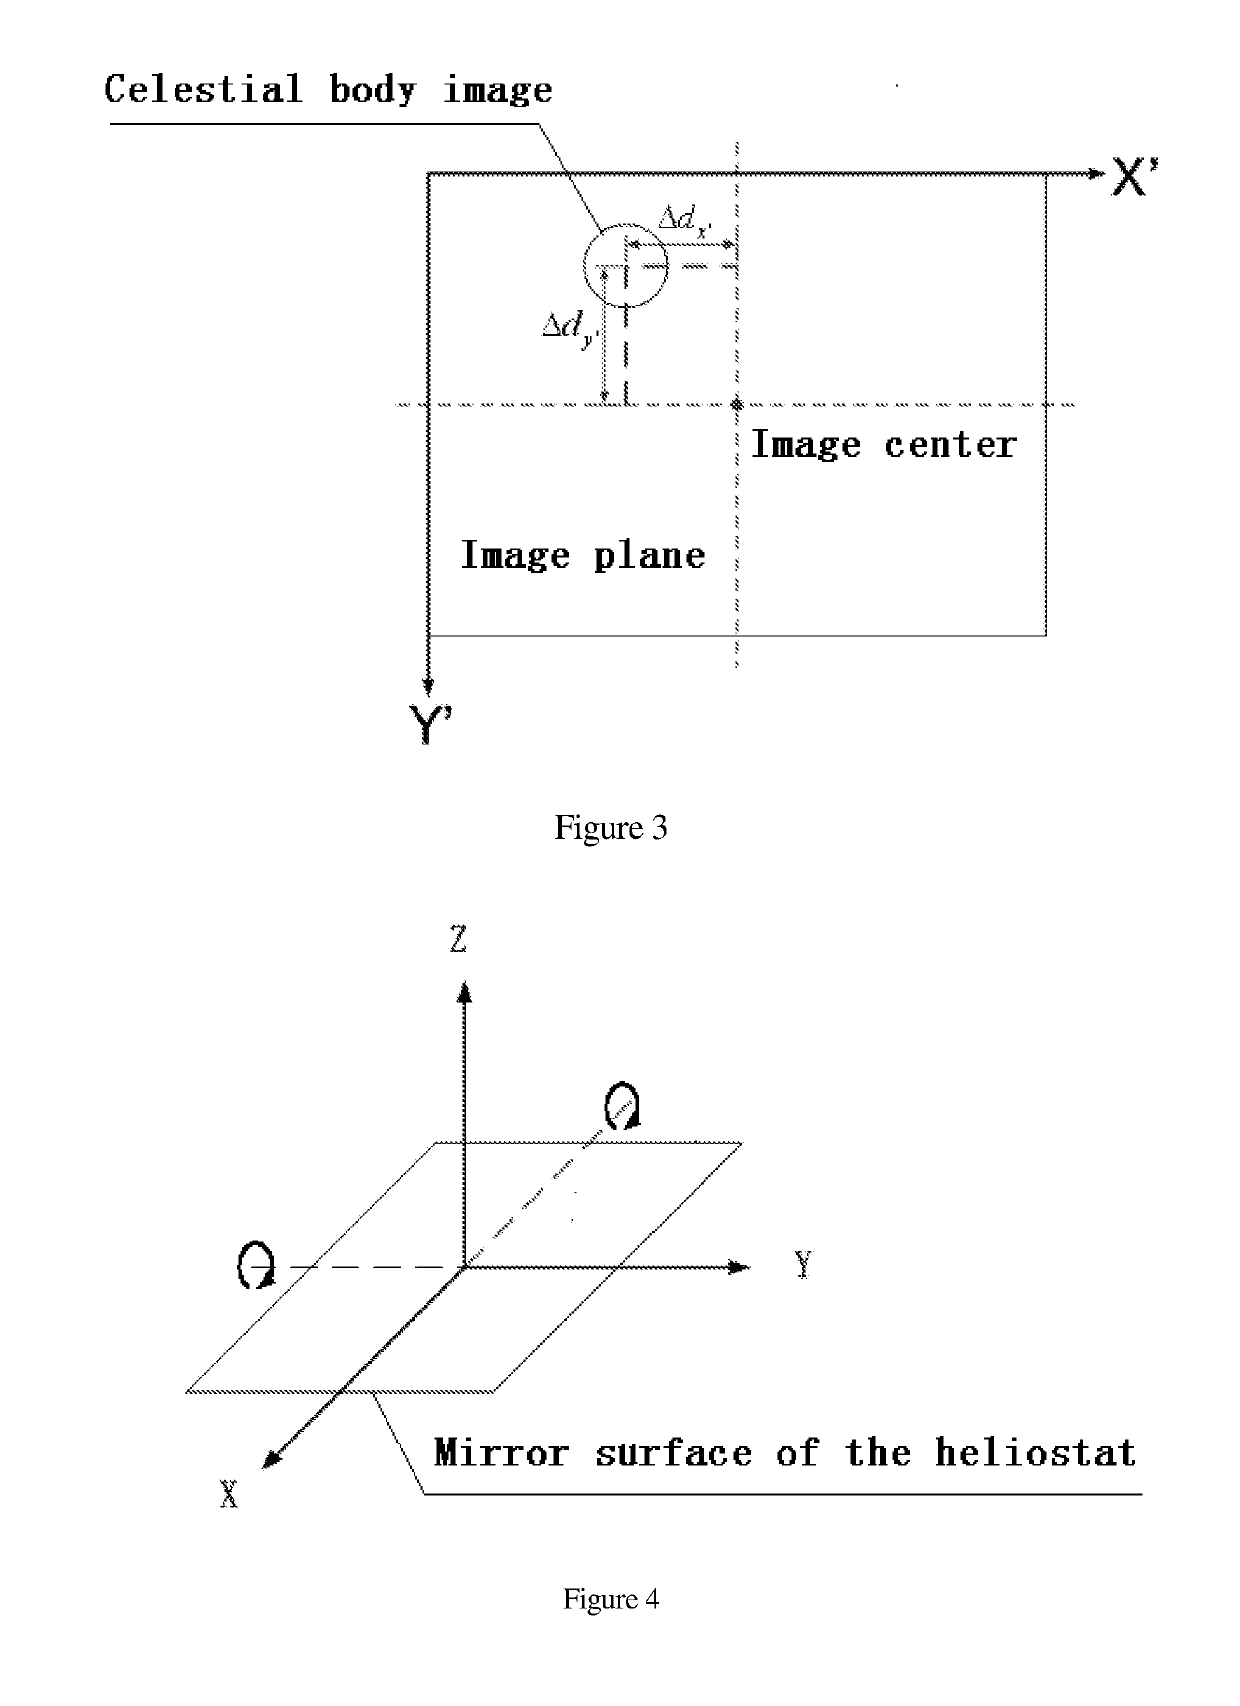 Heliostat Correction System Based on Celestial Body Images and Its Method